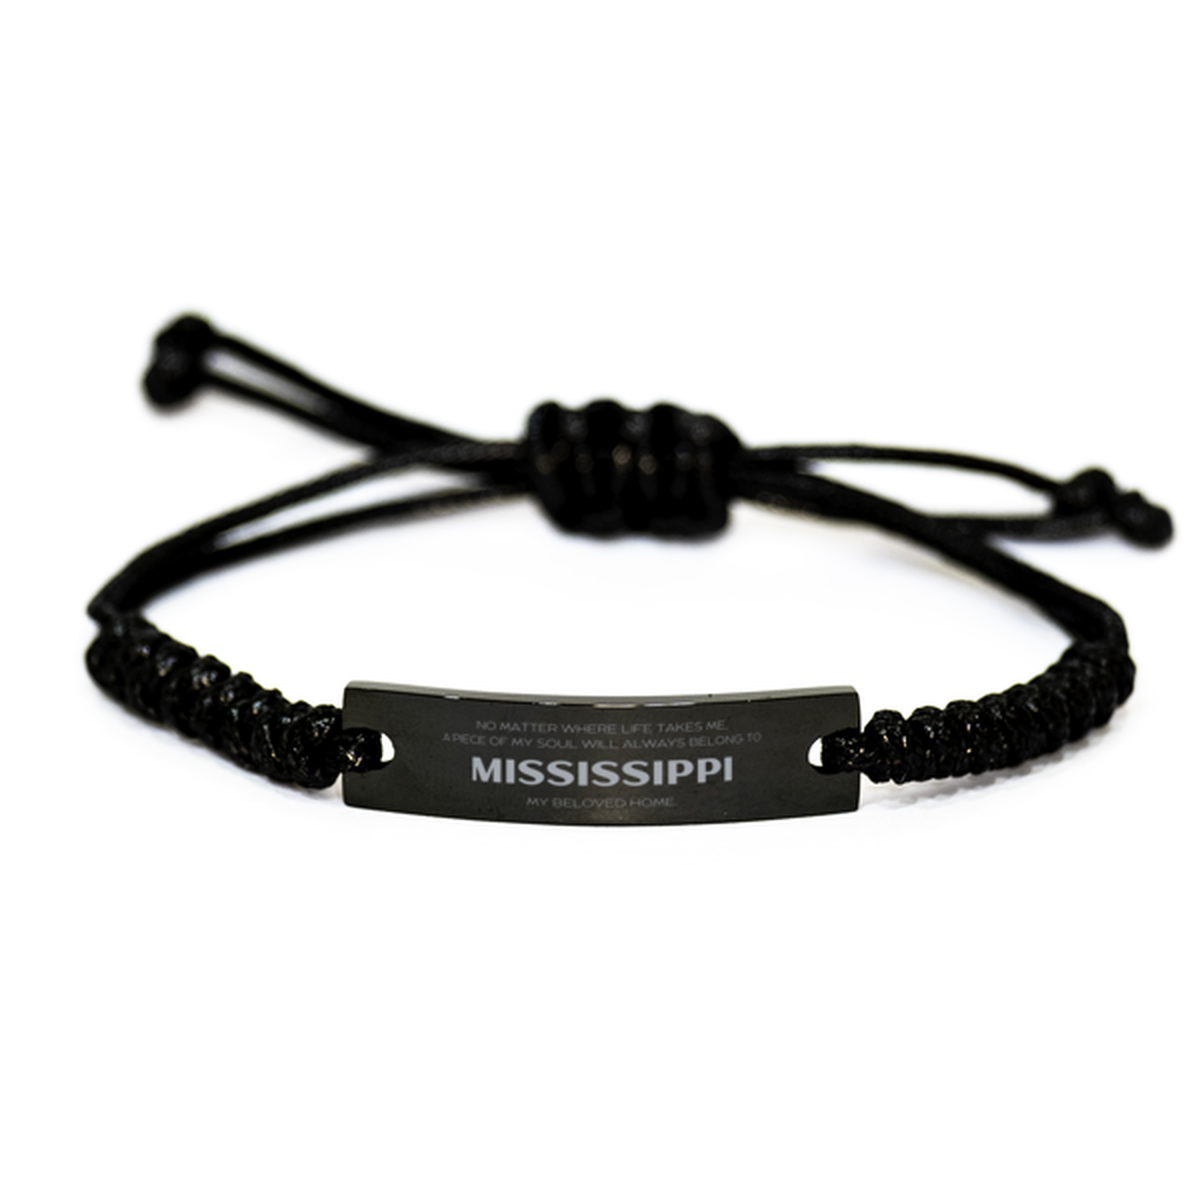 Love Mississippi State Gifts, My soul will always belong to Mississippi, Proud Black Rope Bracelet, Birthday Unique Gifts For Mississippi Men, Women, Friends